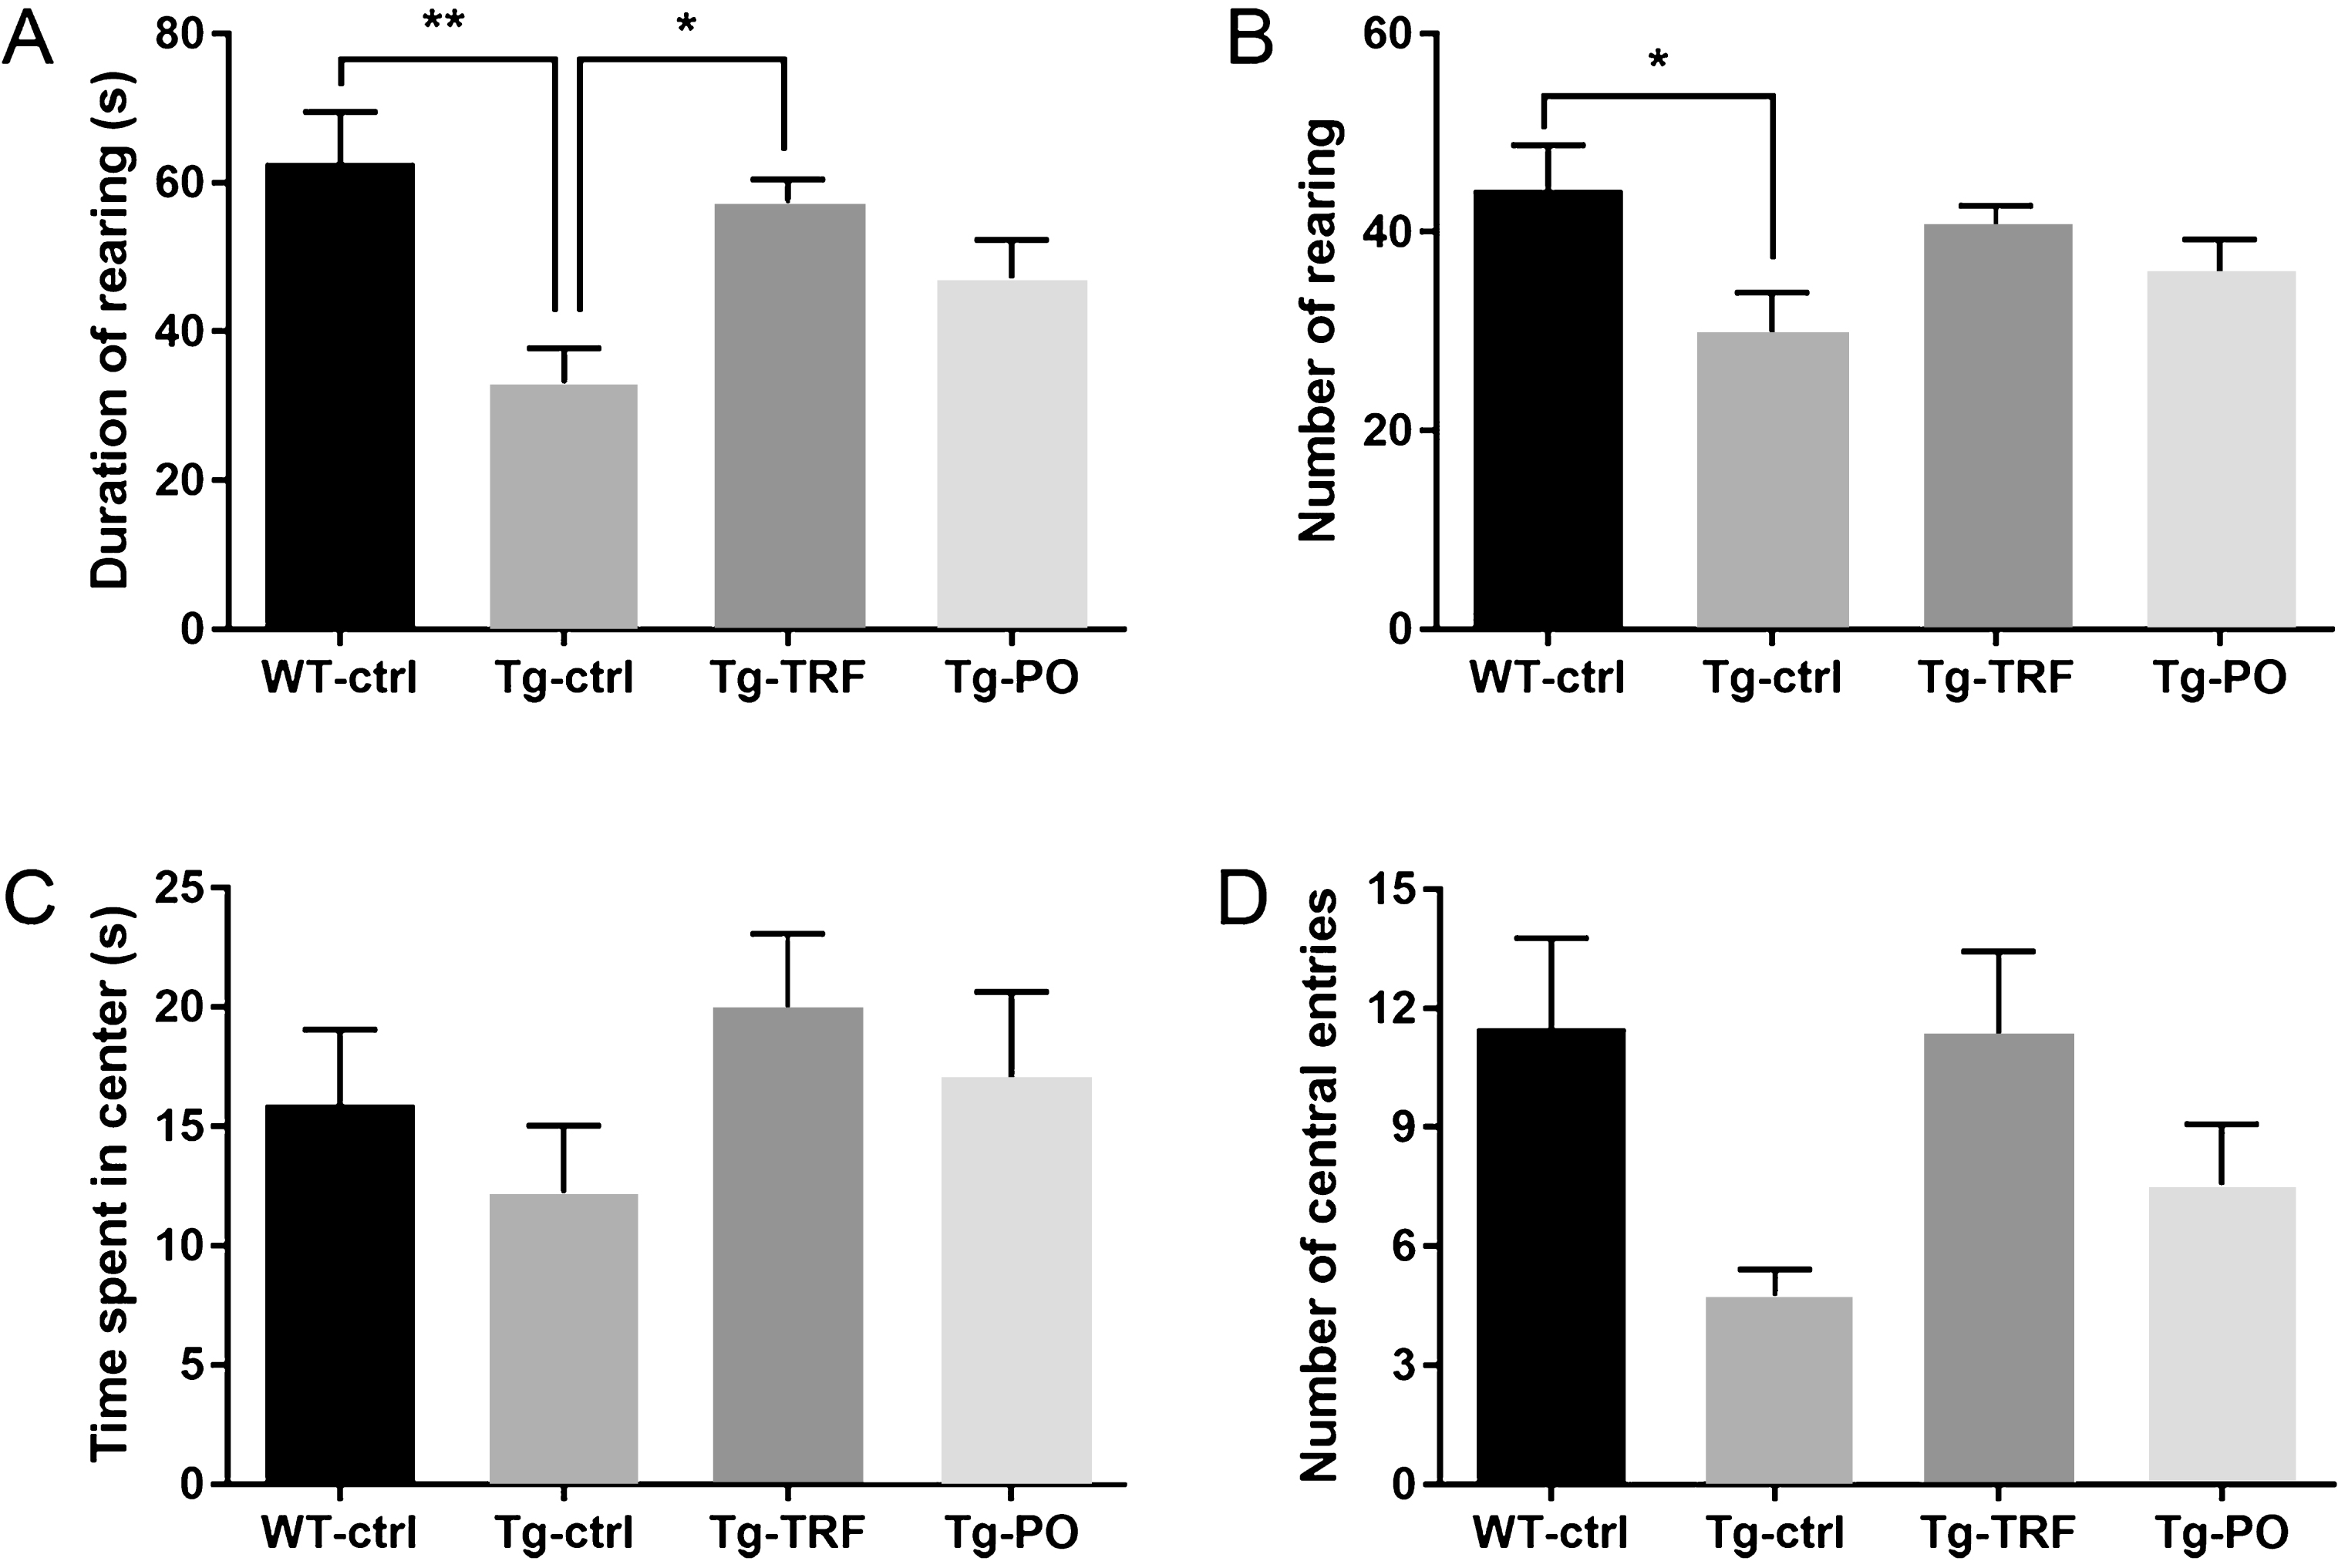 Administration with the tocotrienol-rich fraction (TRF) of palm oil improves exploration activity in AβPP/PS1 mice as measured by the open field test. A, B) Tg-ctrl mice displayed significantly lower total rearing time and number of rearings compared to WT-ctrl mice, while Tg-TRF mice showed a significant improvement in total rearing time and a slight increase in rearing frequency. C, D) The time spent in the field center and the frequencies of central entries were slightly higher in both WT-ctrl and Tg-TRF mice compared to Tg-ctrl mice, although the difference was not significant. Data represent mean±S.E.M. [Bonferroni post hoc test after analysis of variance (WT-ctrl, n = 12; Tg-ctrl, n = 8; Tg-TRF; n = 9; Tg-PO, n = 9)]. **p < 0.01, *p < 0.05.